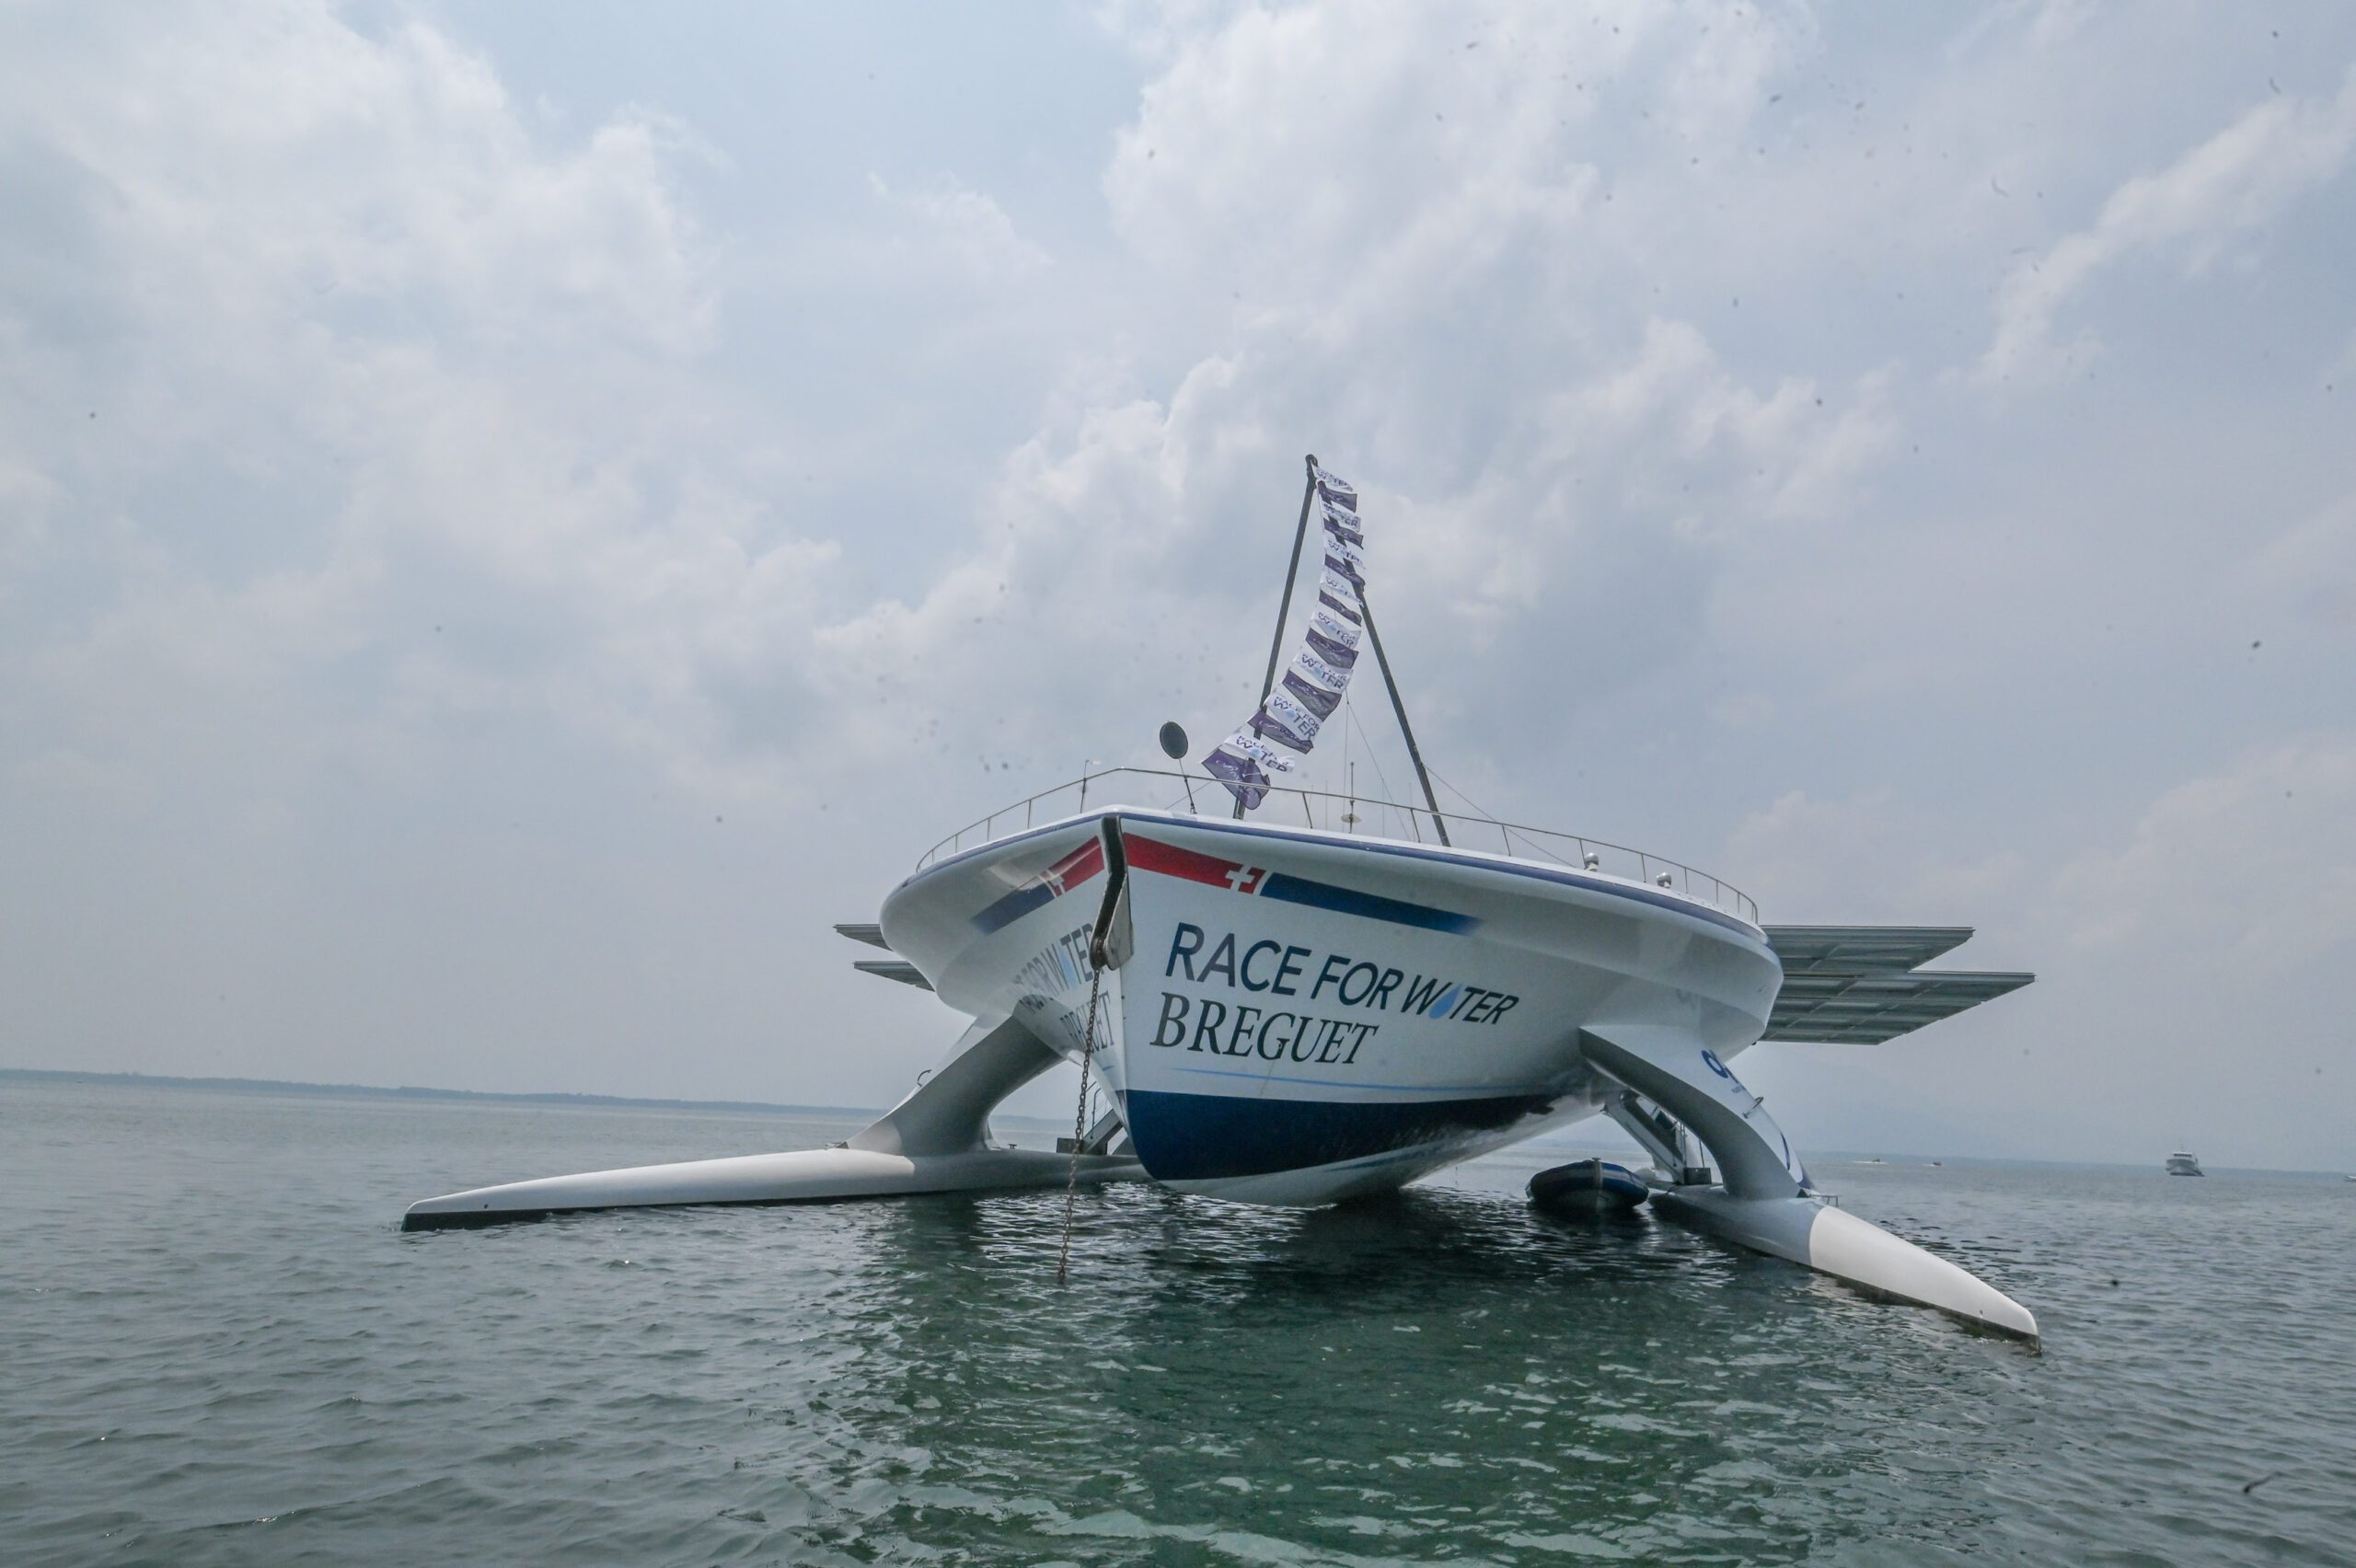 IN PHOTOS: Race for Water Odyssey visits Puerto Princesa